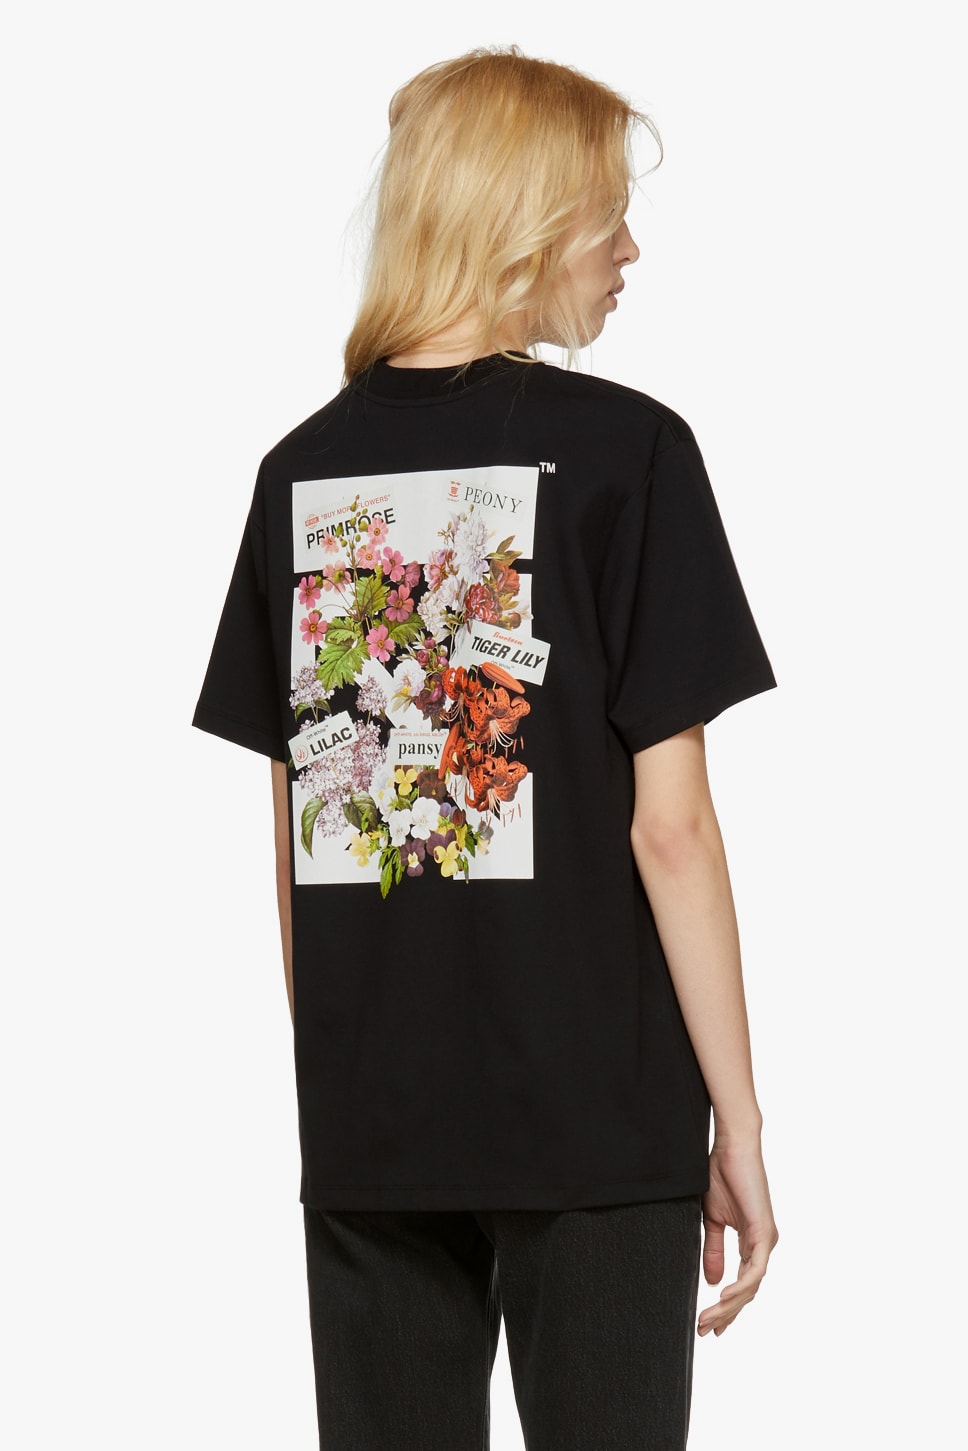 Off-White New Arrivals Spring Collection T-Shirt Back Graphic